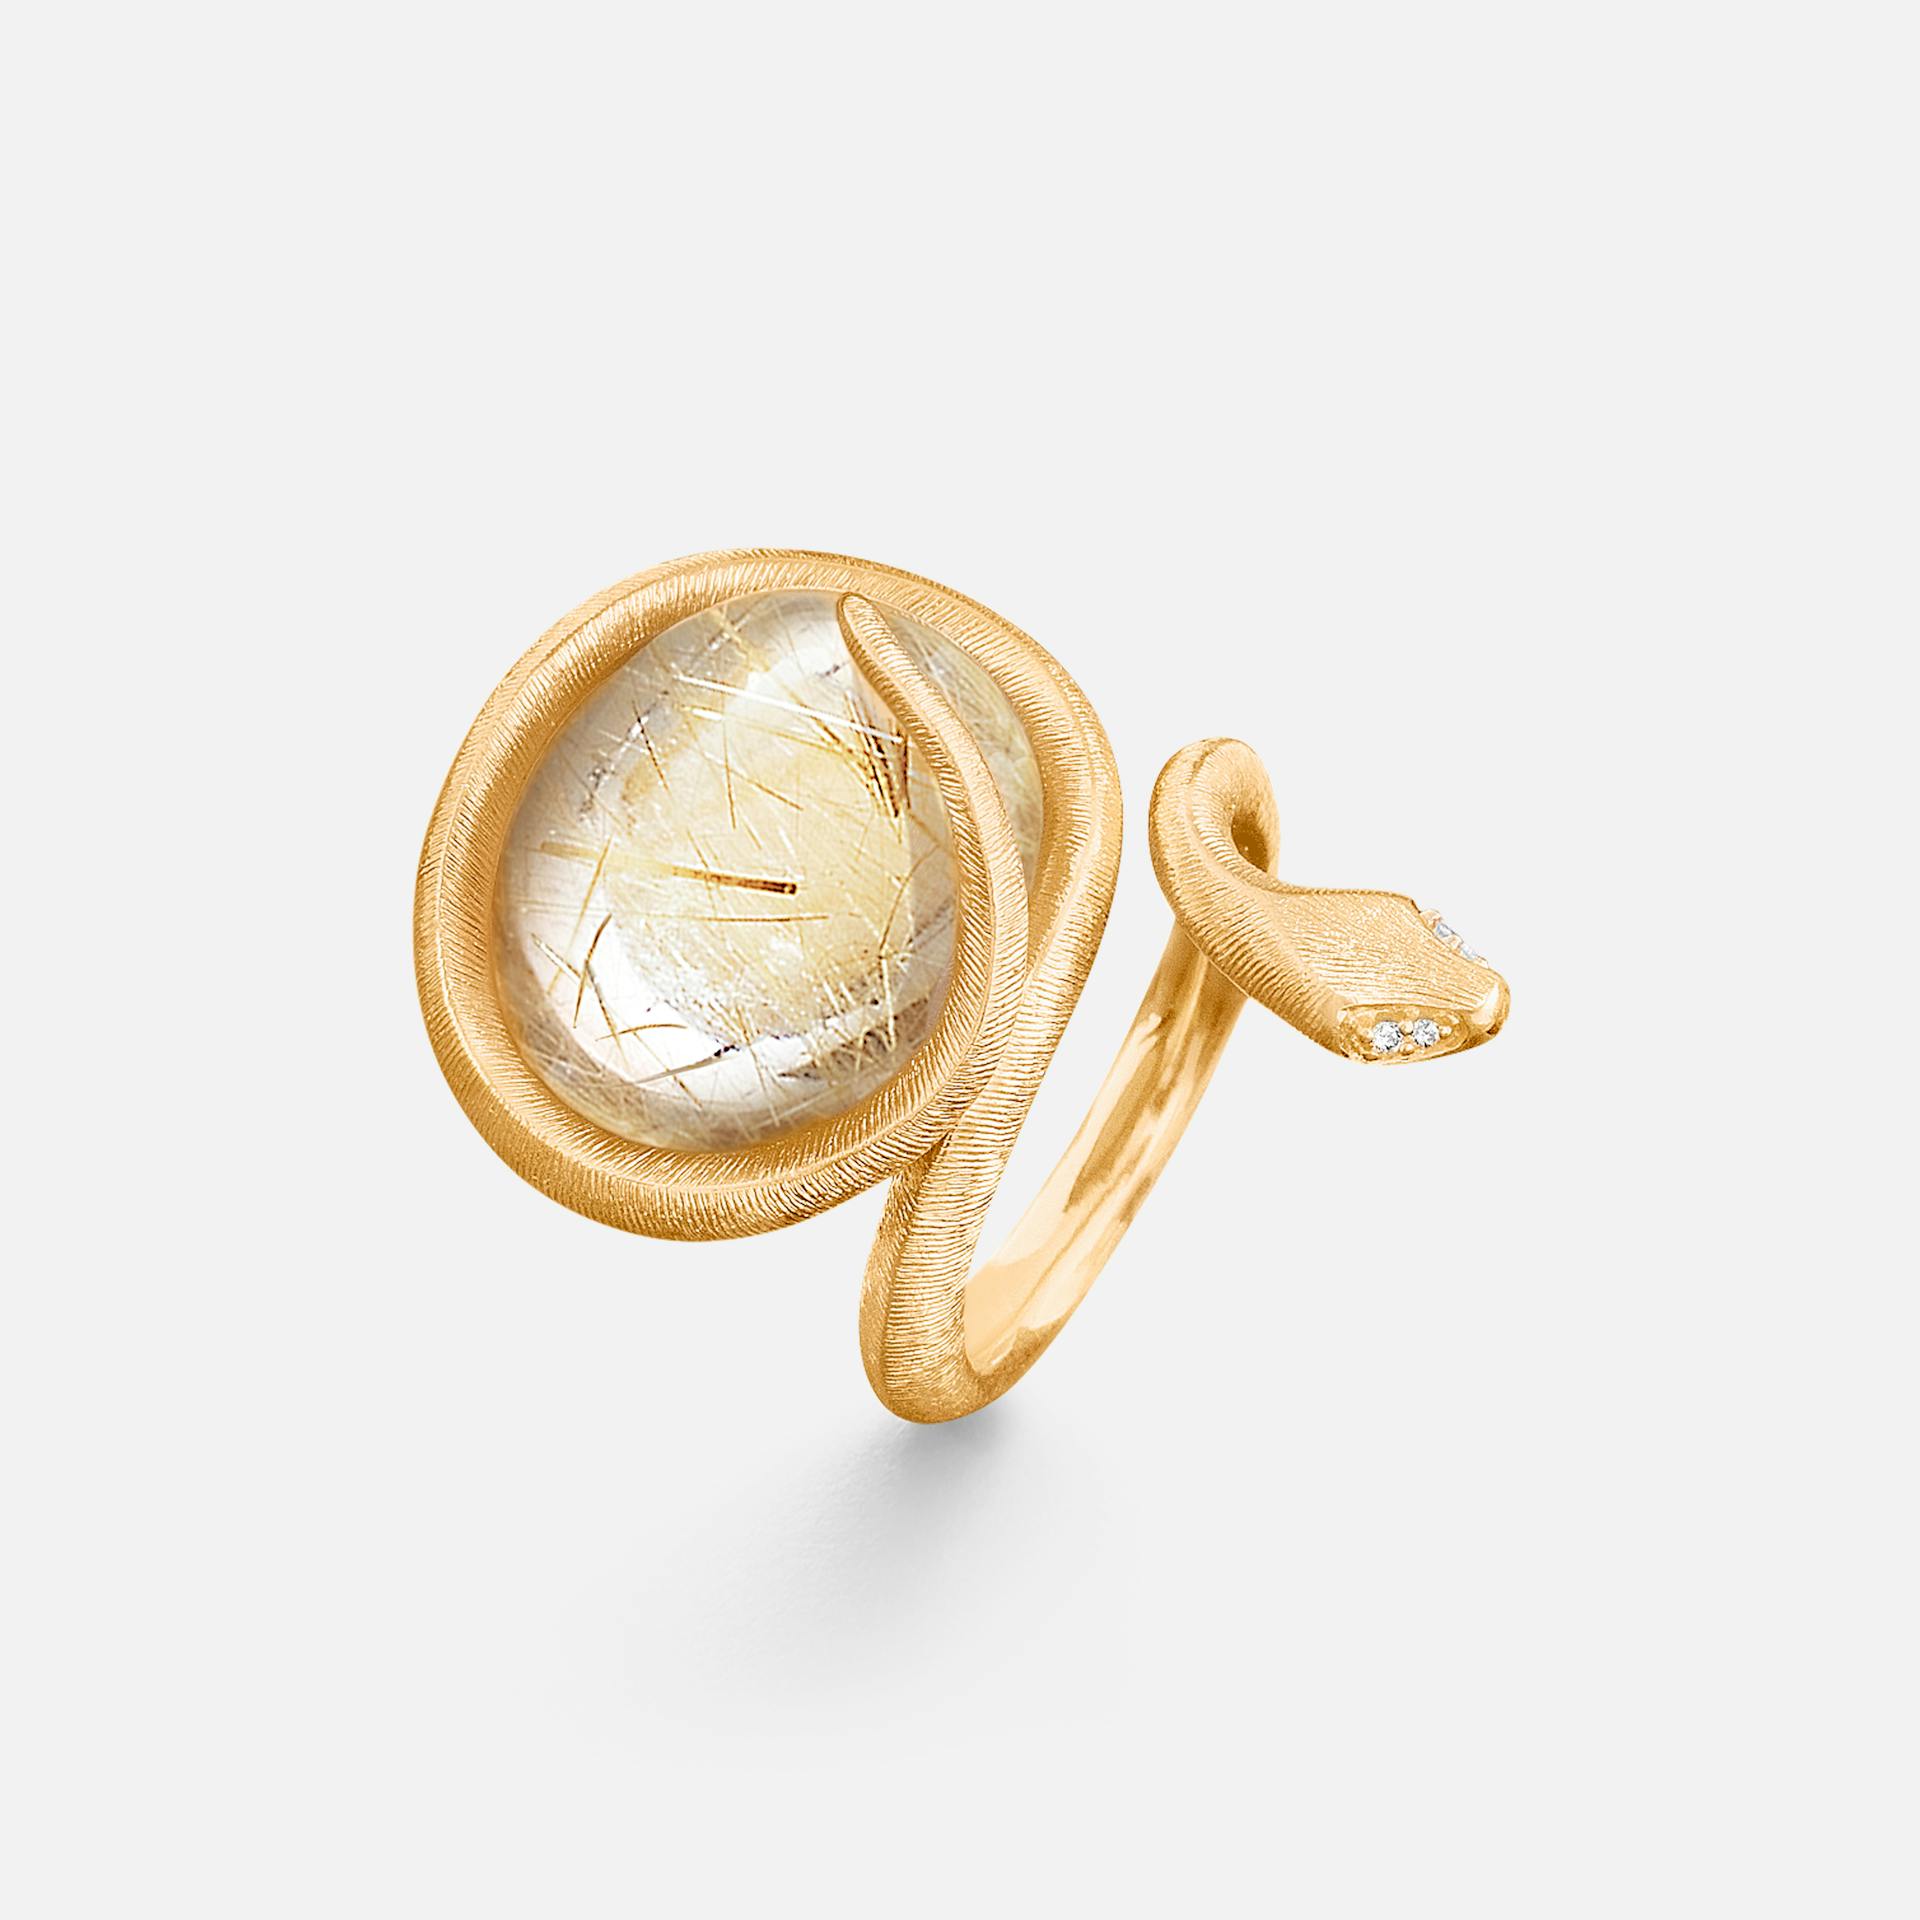 Snakes Ring in Yellow Gold with Rutile Quartz and Diamonds  |  Ole Lynggaard Copenhagen 